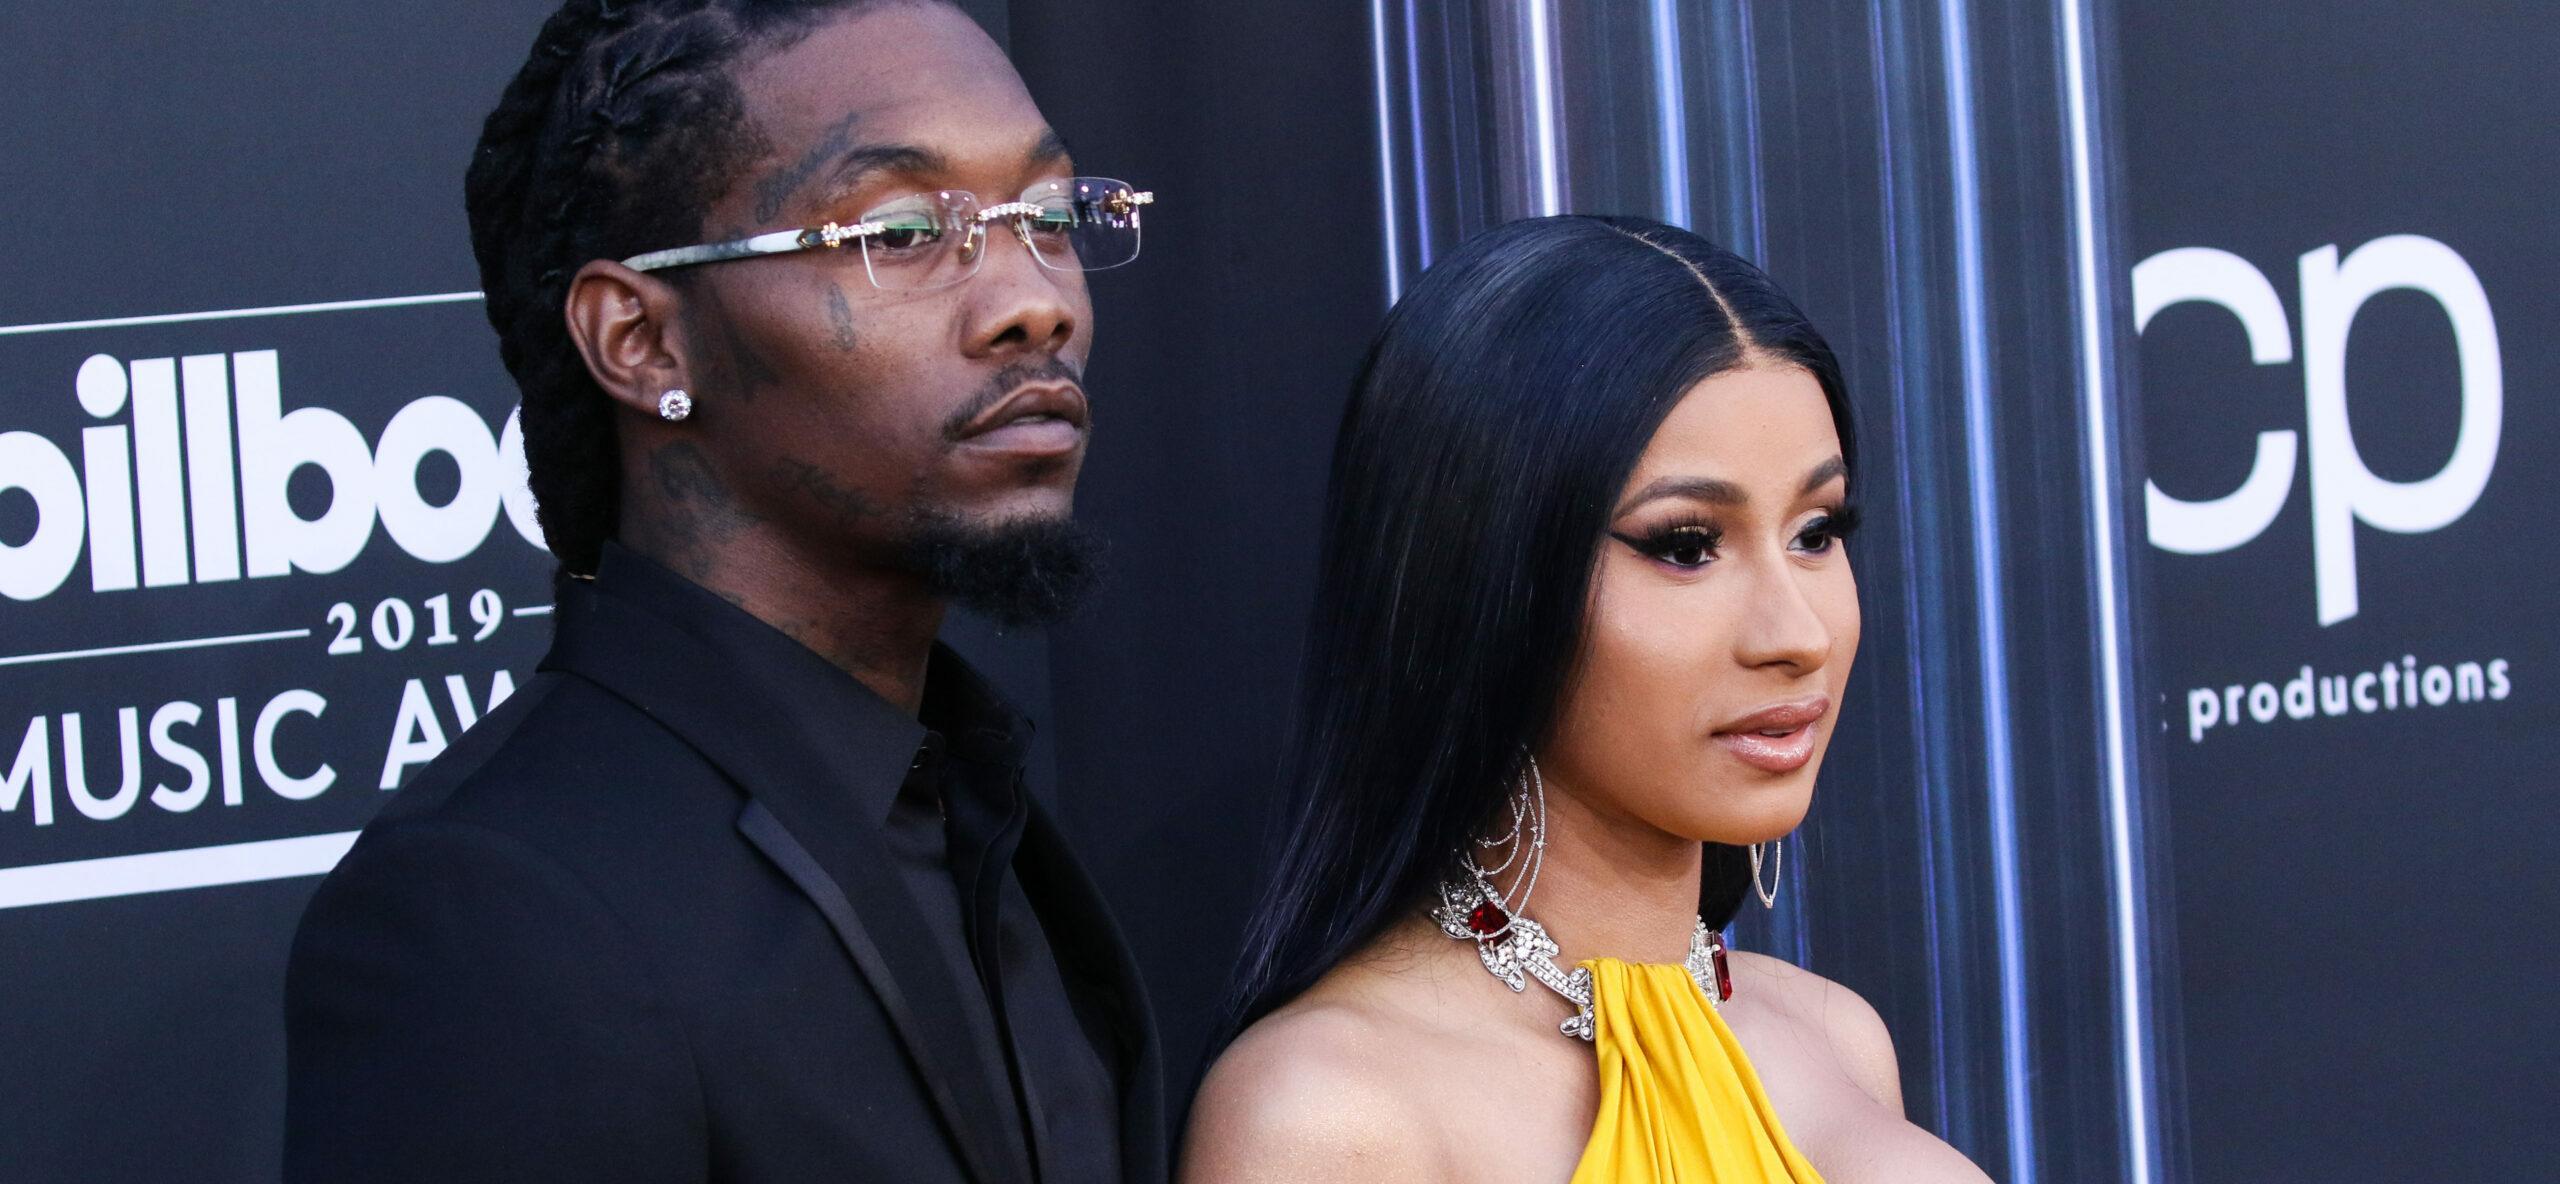 ‘Migos’ Star Offset Ordered To Pay $950K In Lawsuit Over Missing Bentley